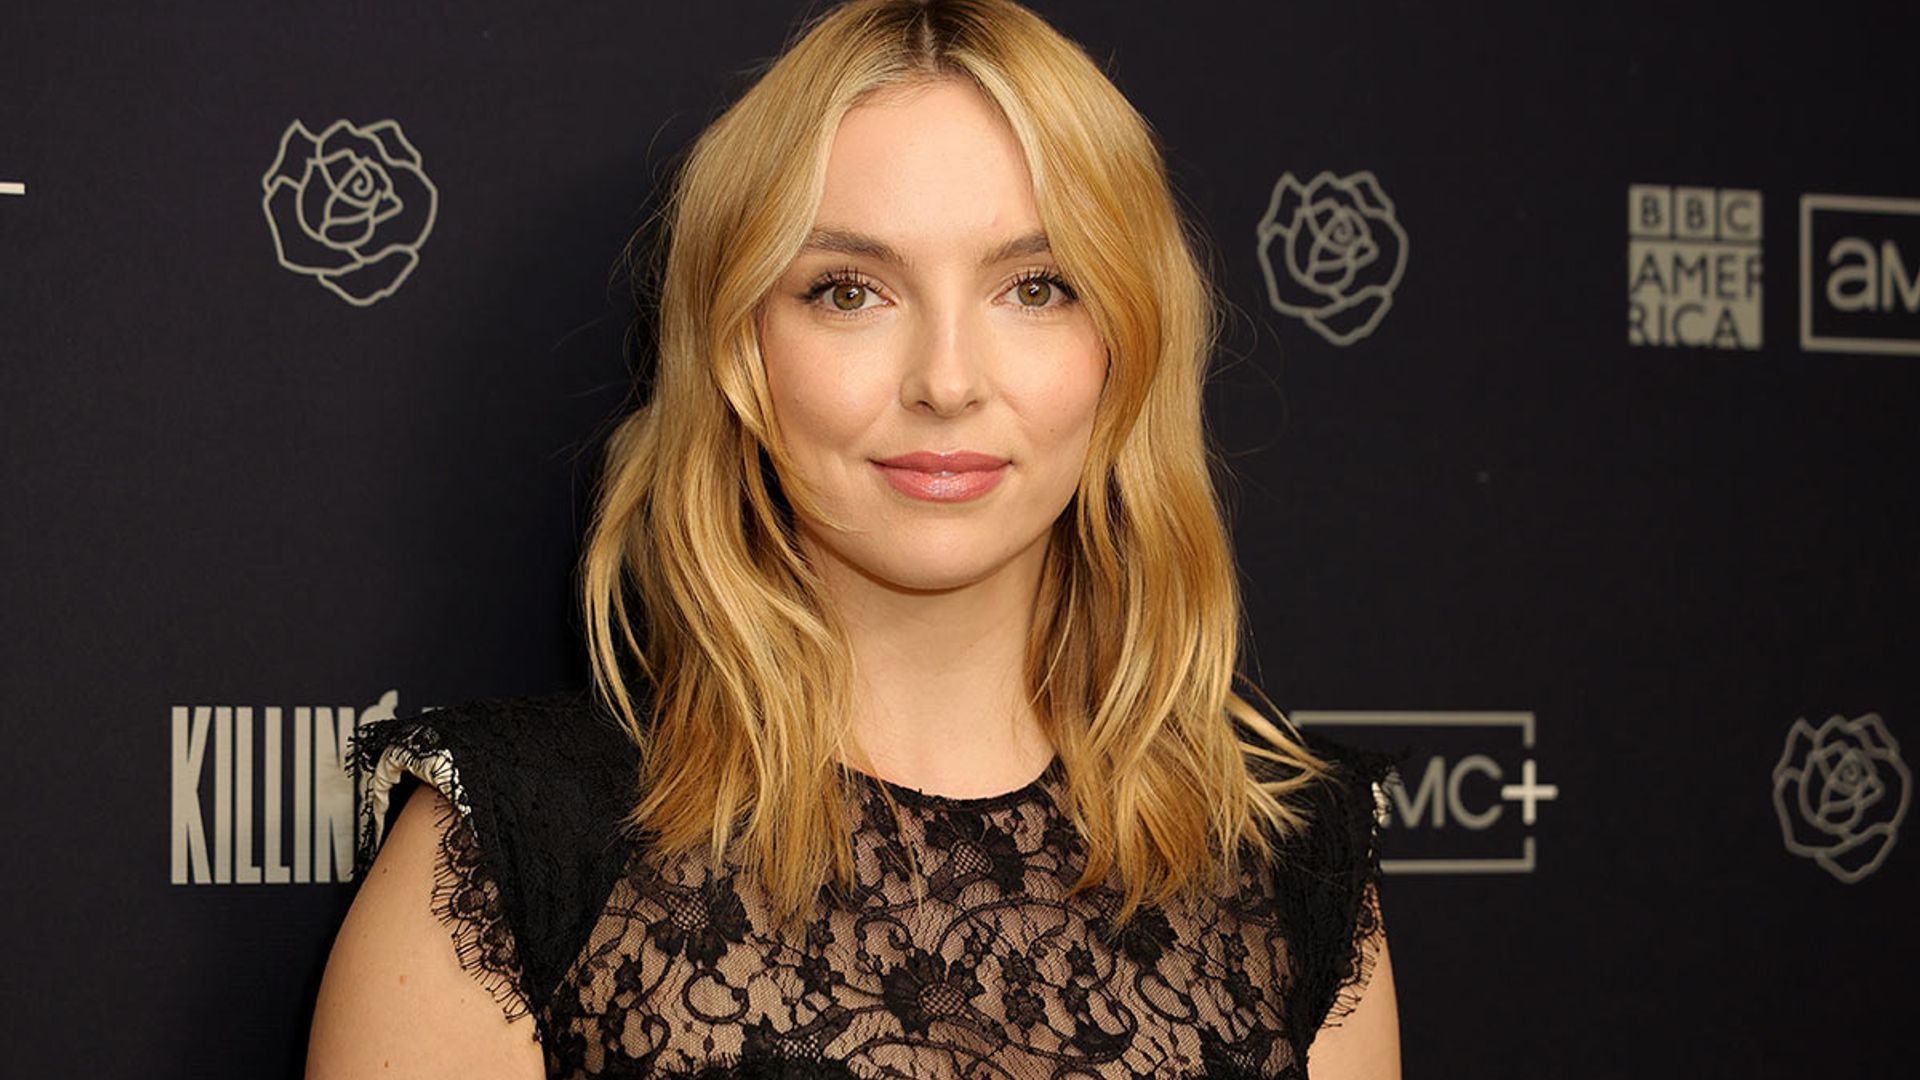 Jodie Comer's modest home life will surprise you